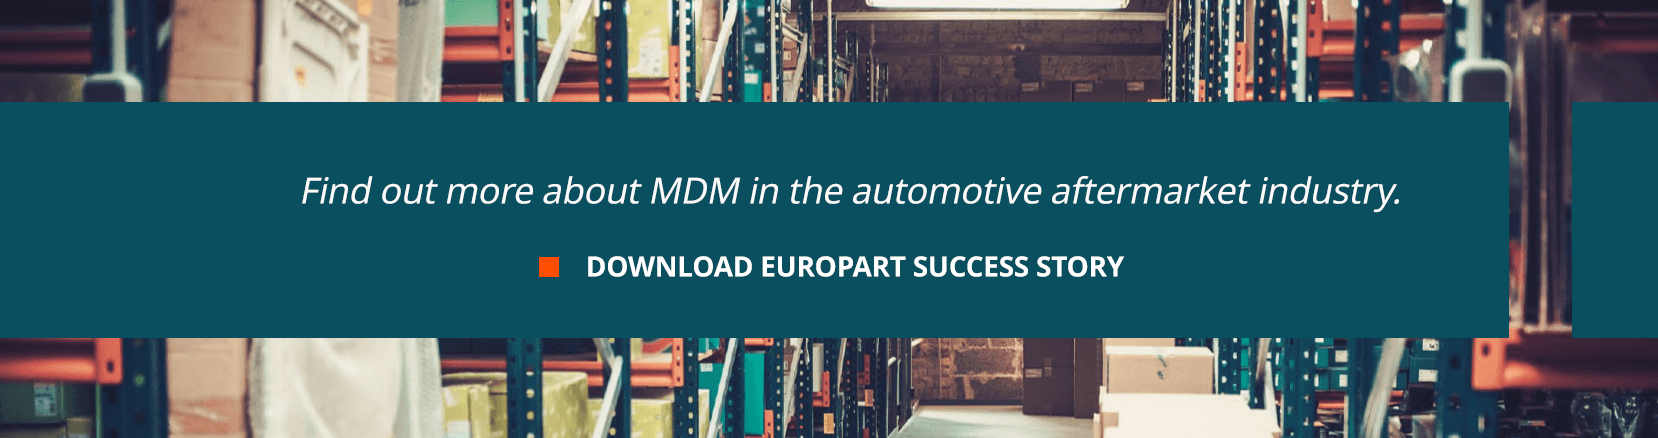 Find out more about MDM in the automotive aftermarket industry